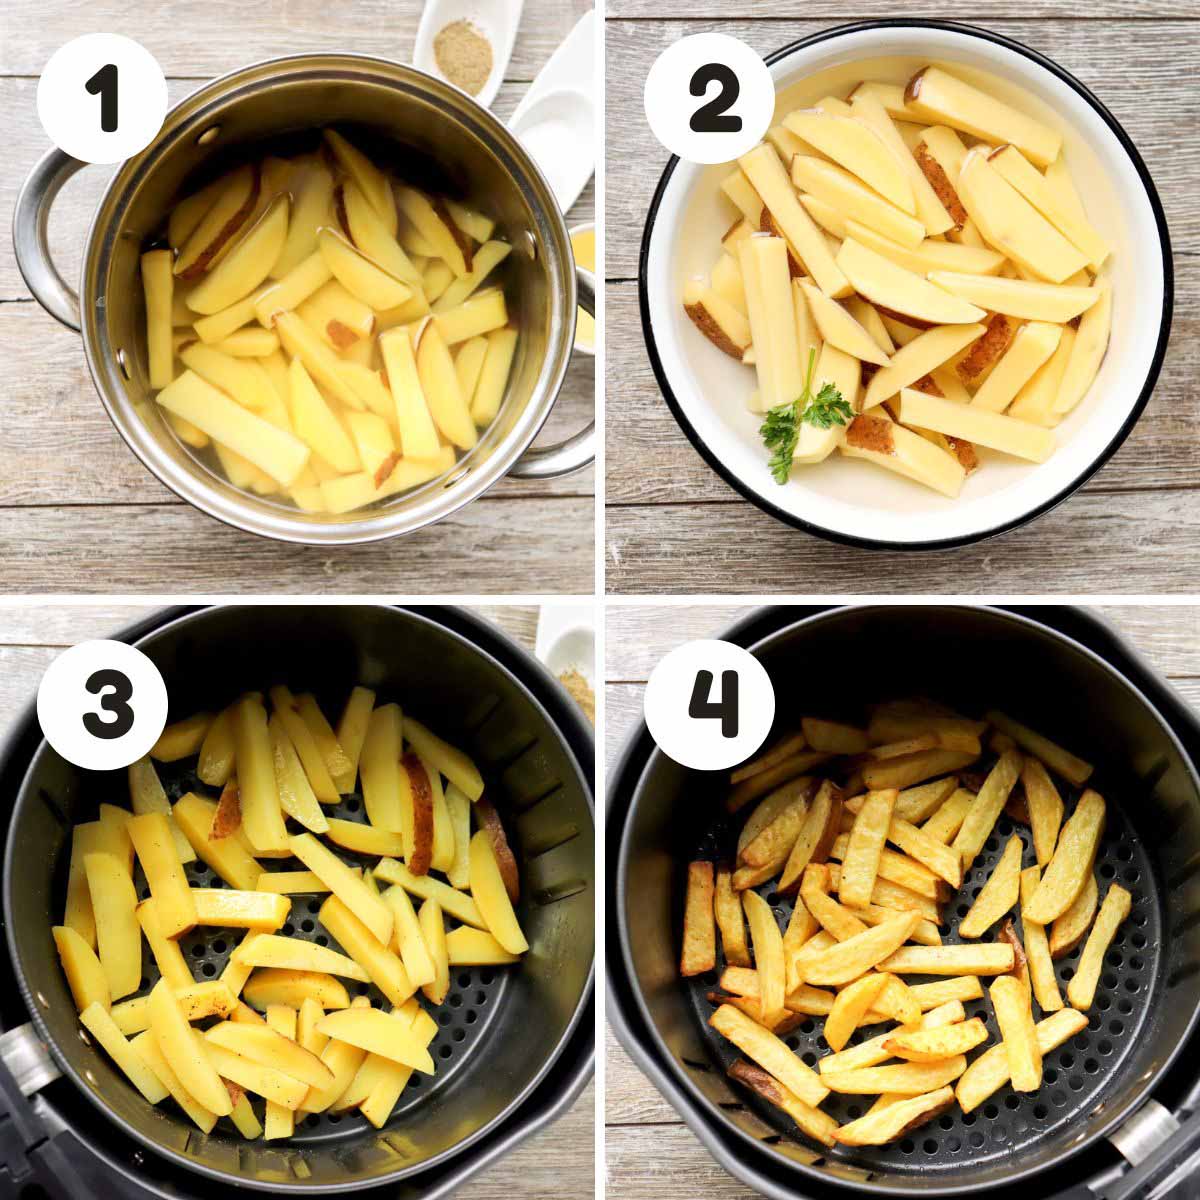 Steps to make the fries.